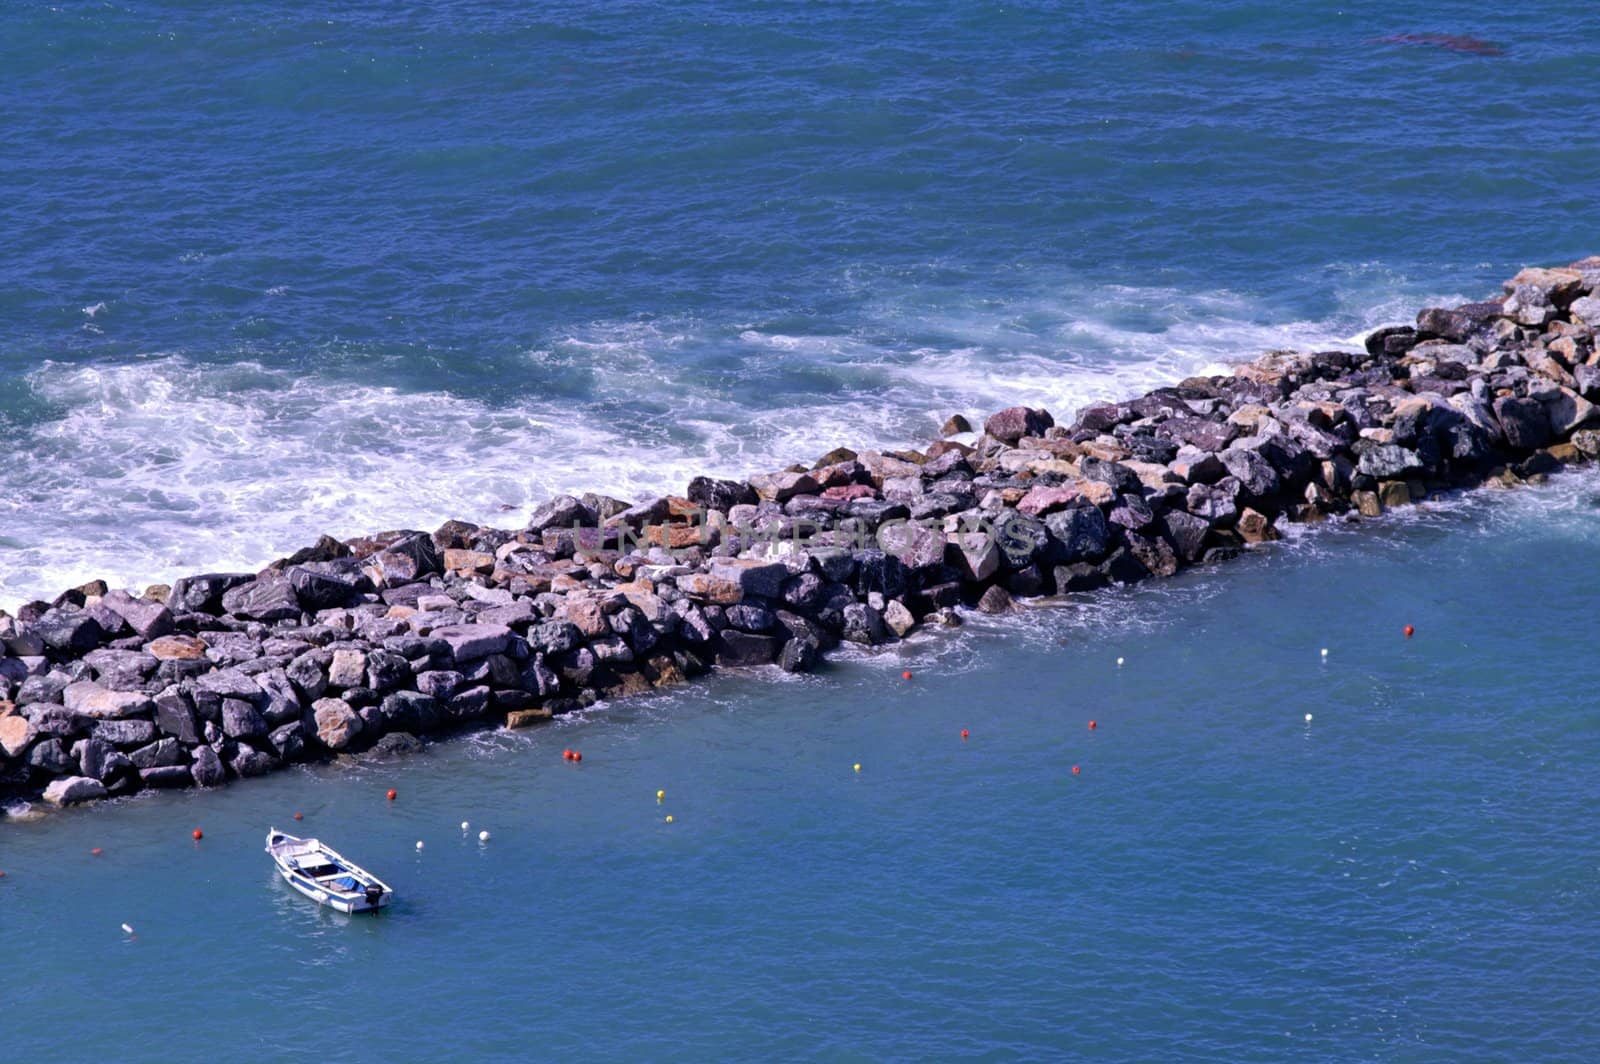 Breakwater and boat